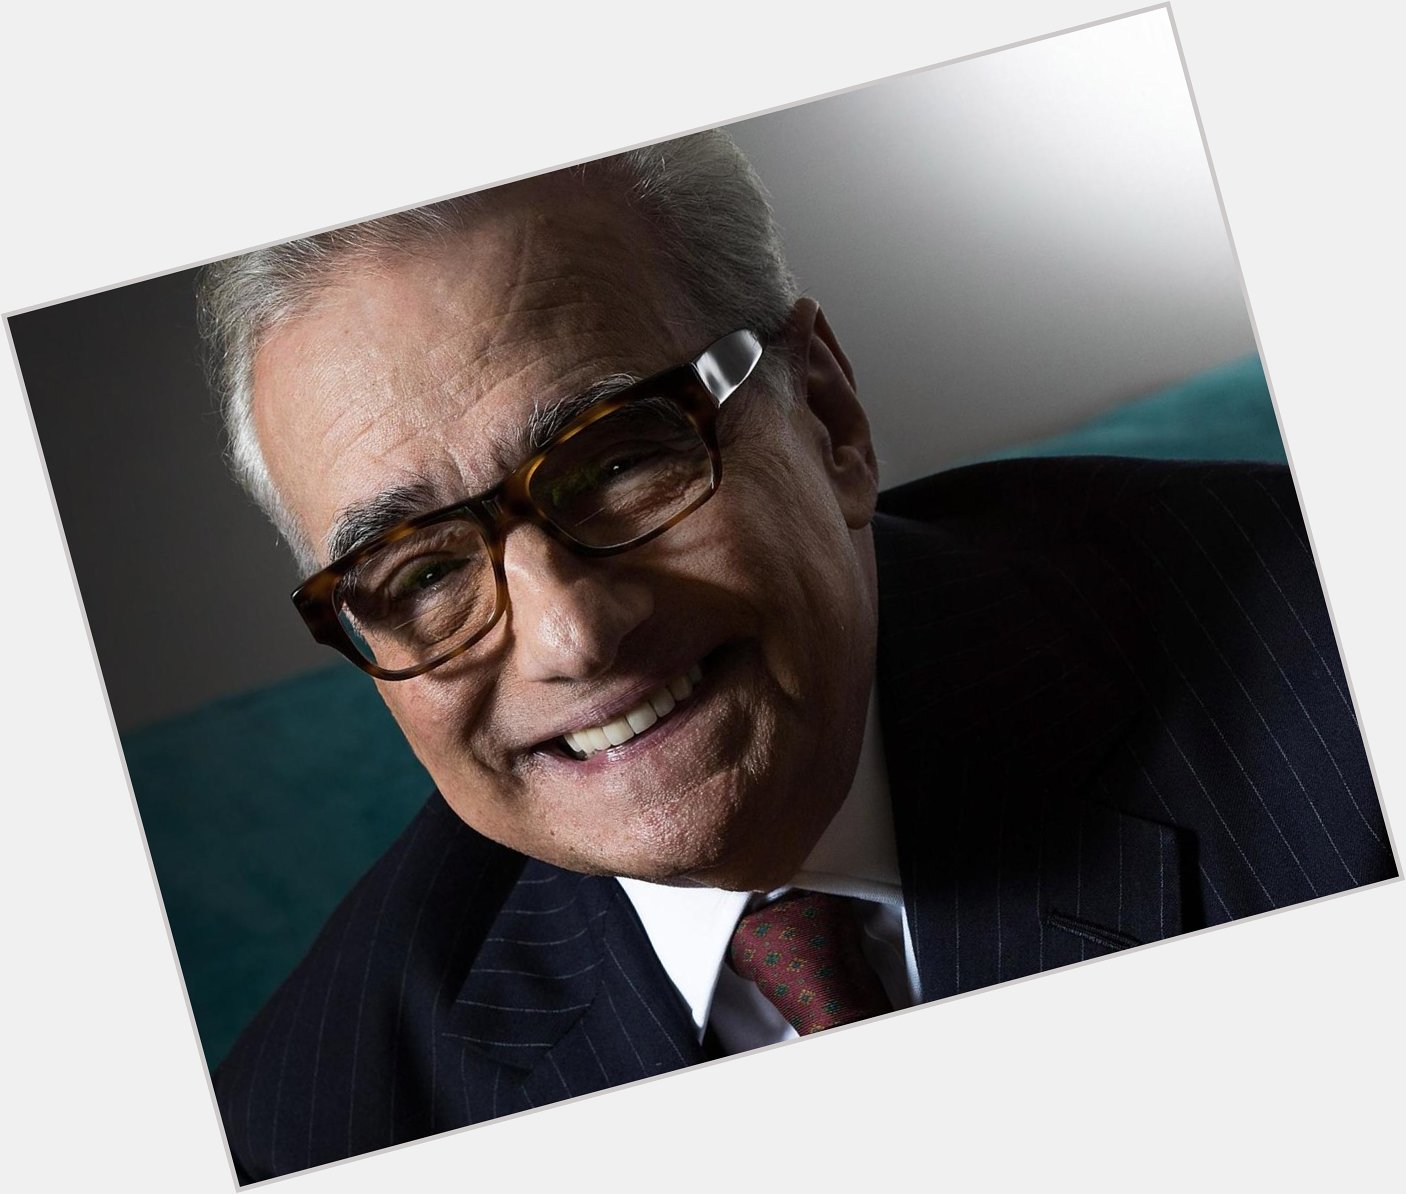 Happy belated 78th birthday to Martin Scorsese. What is your favorite Scorsese film? 